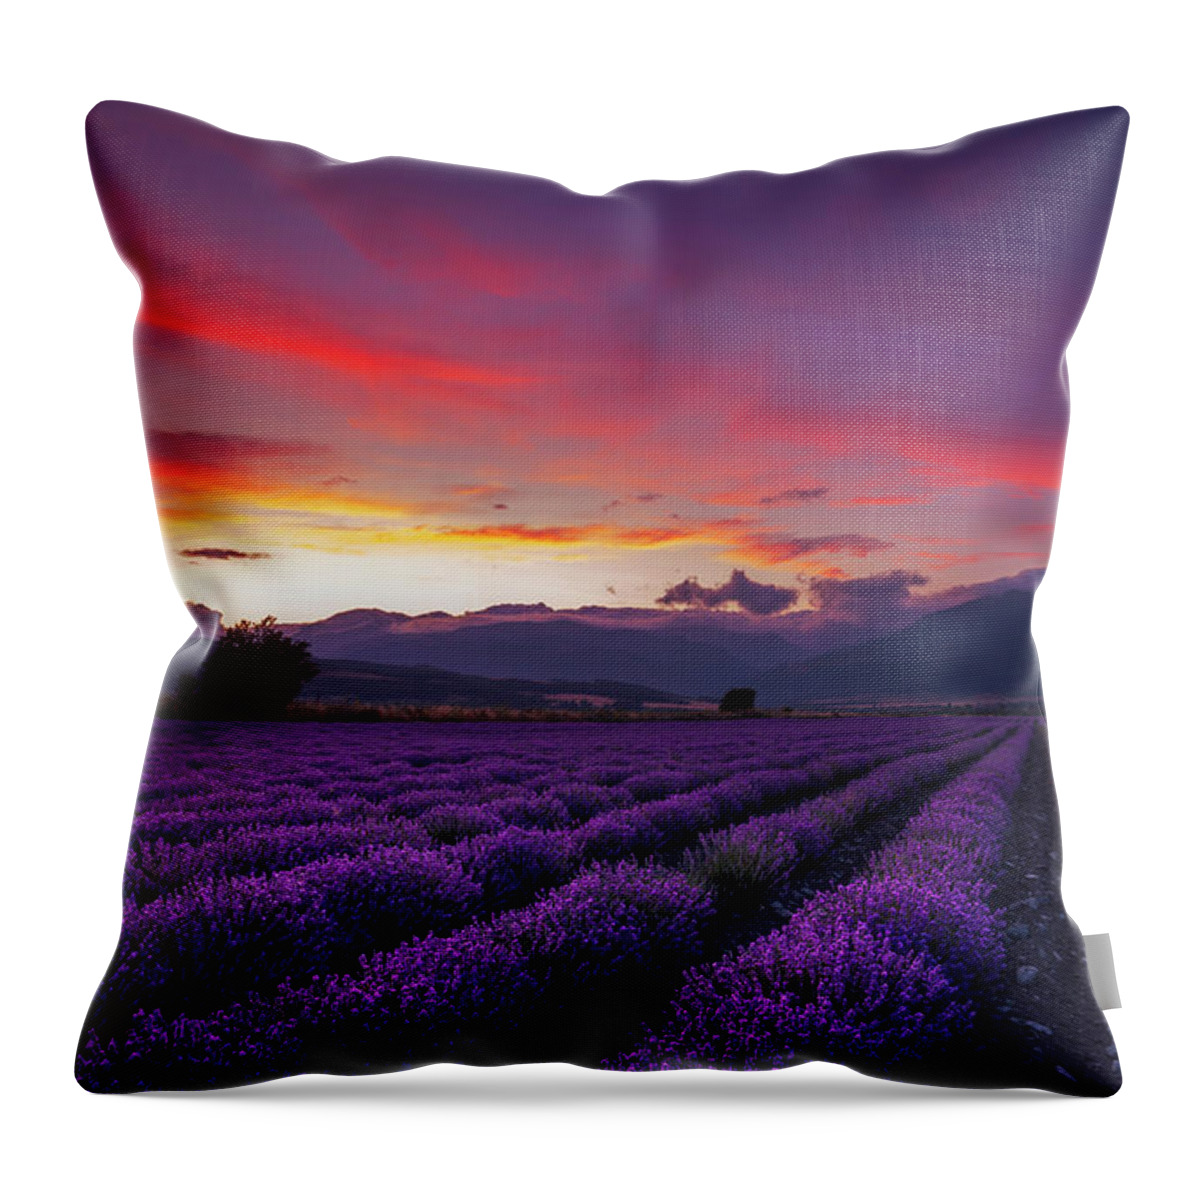 #faatoppicks Throw Pillow featuring the photograph Lavender Season by Evgeni Dinev